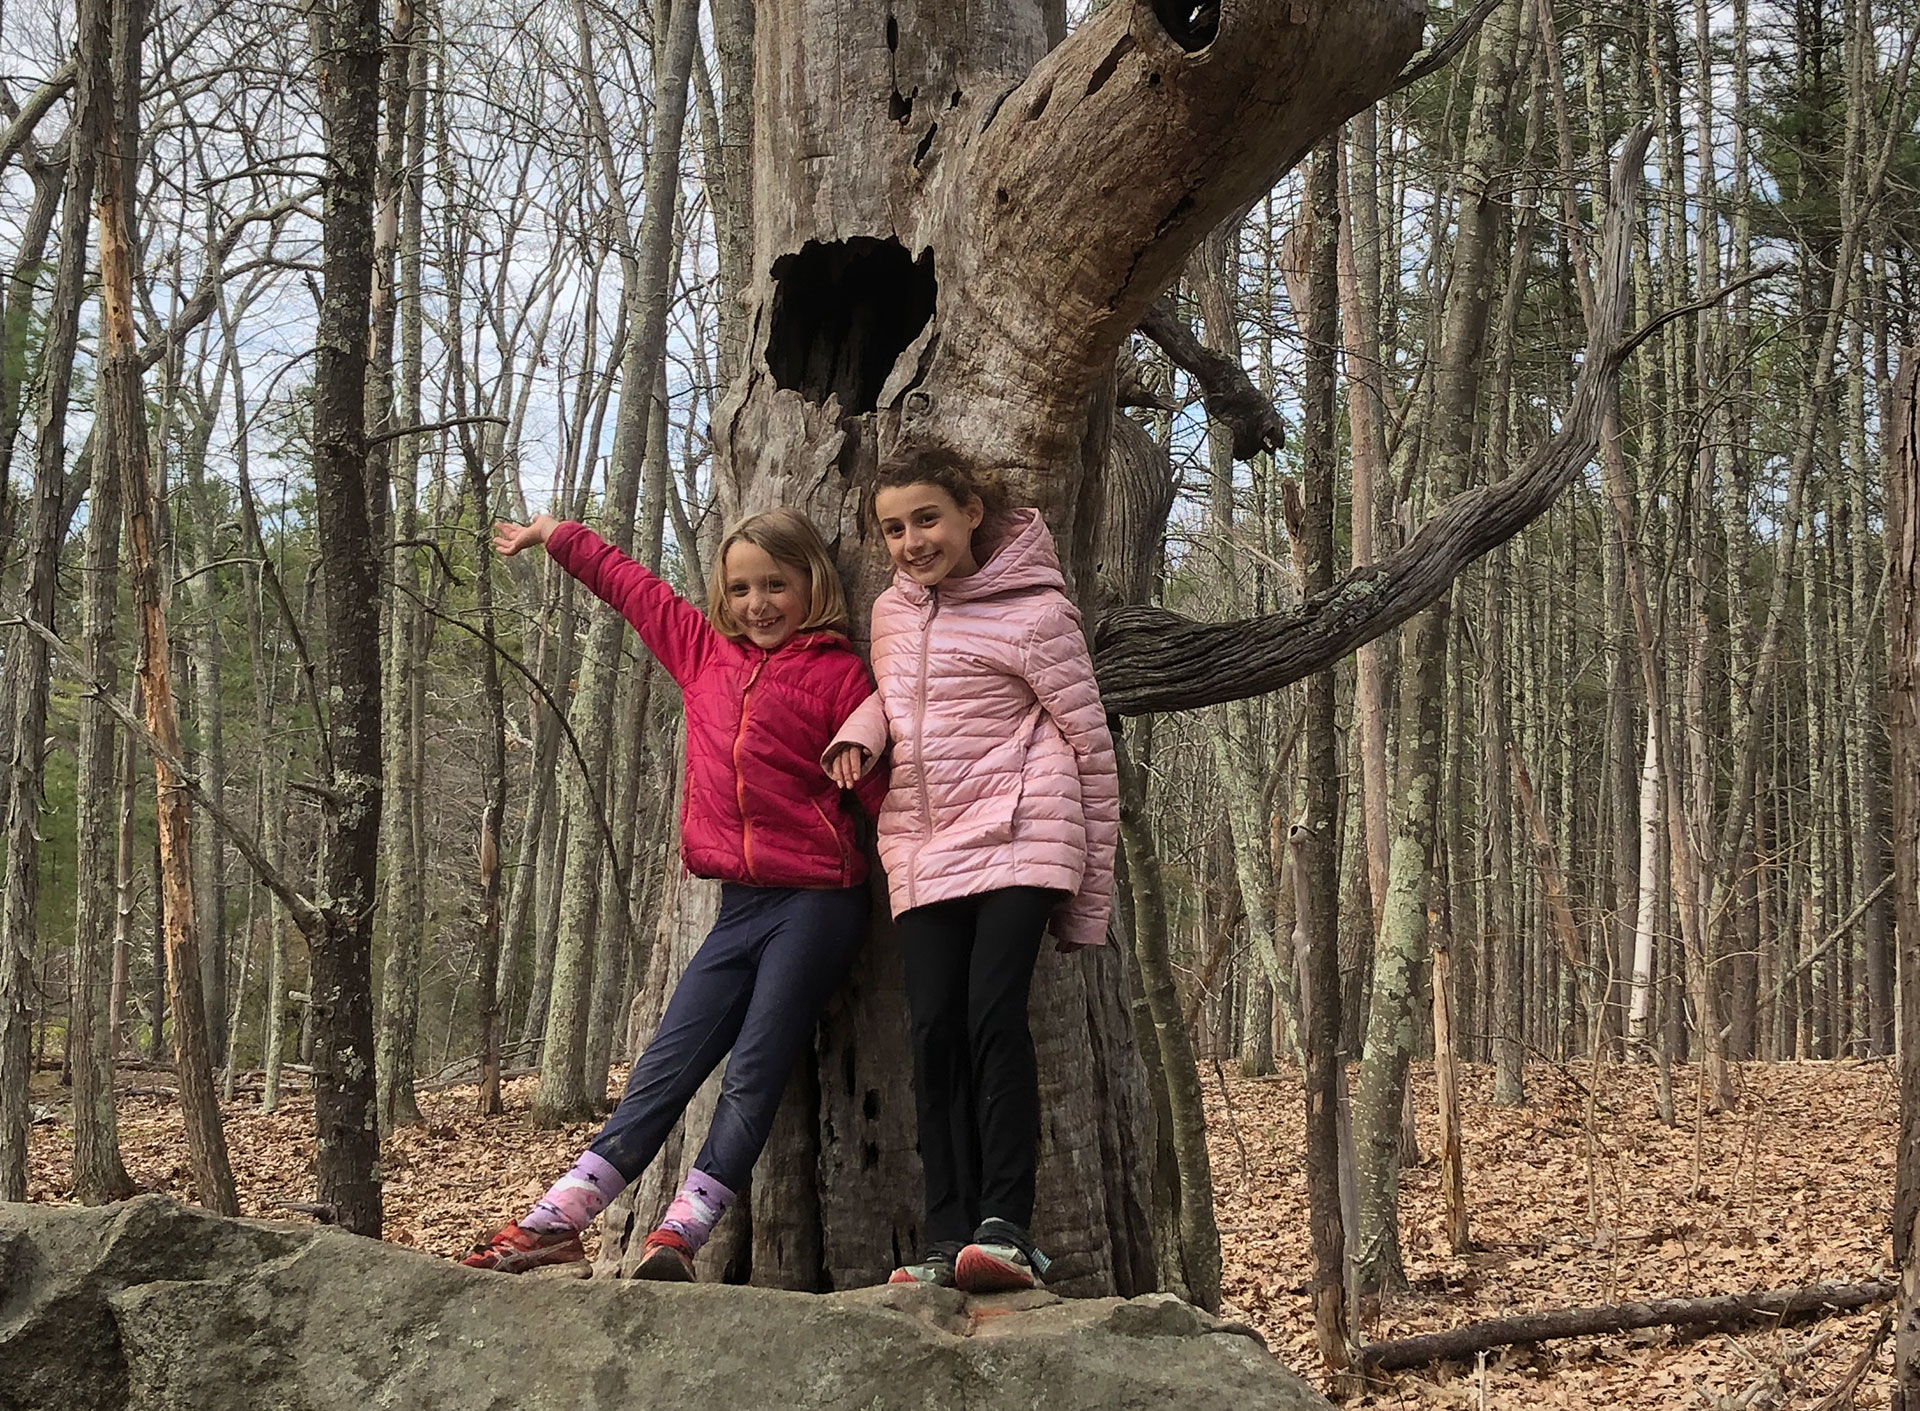 Two children posing in front of a tree in the woods